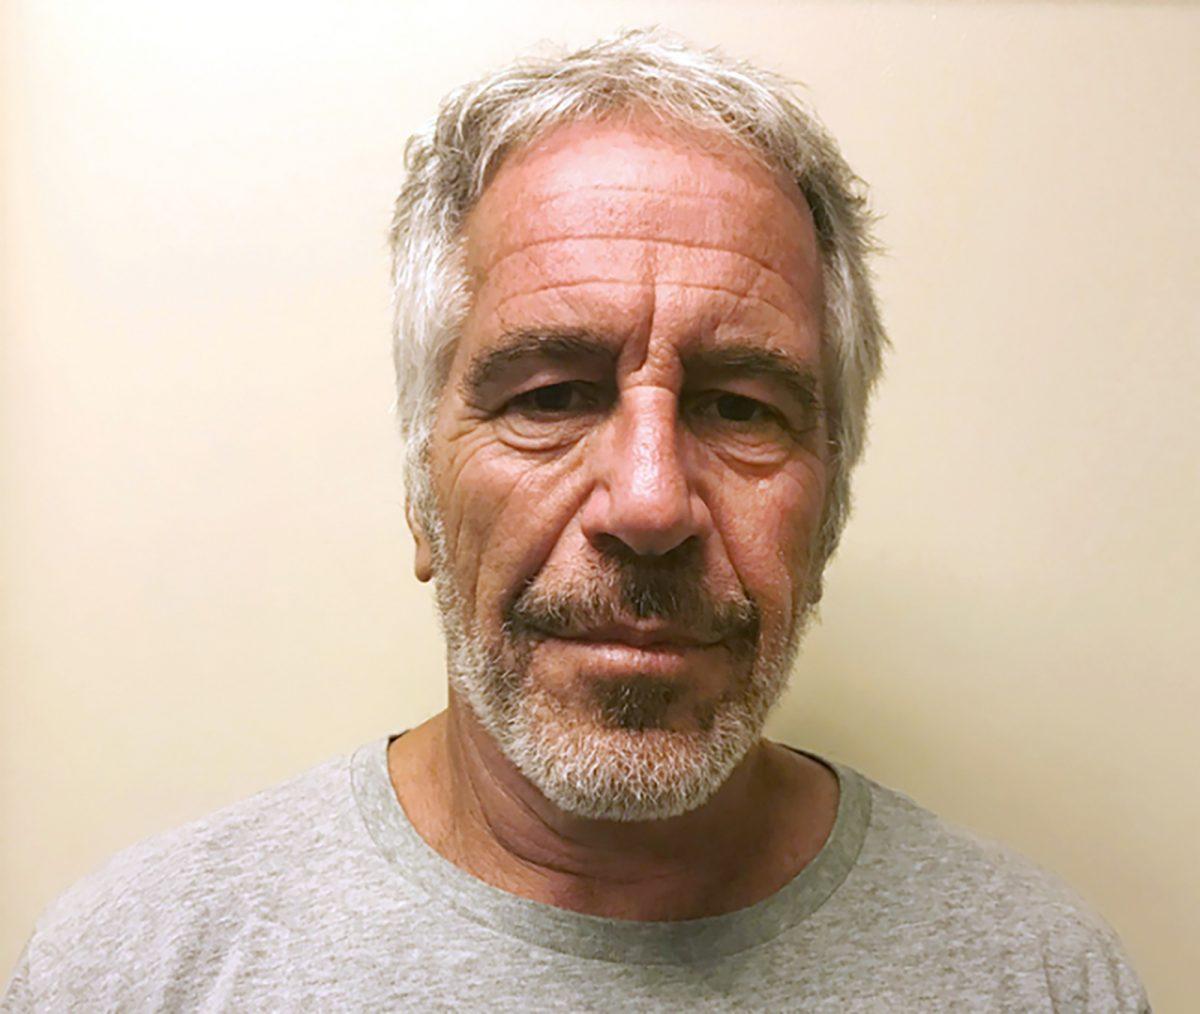 Jeffrey Epstein appears in a photograph taken for the New York State Division of Criminal Justice Services' sex offender registry March 28, 2017. (New York State Division of Criminal Justice Services/Handout via Reuters)